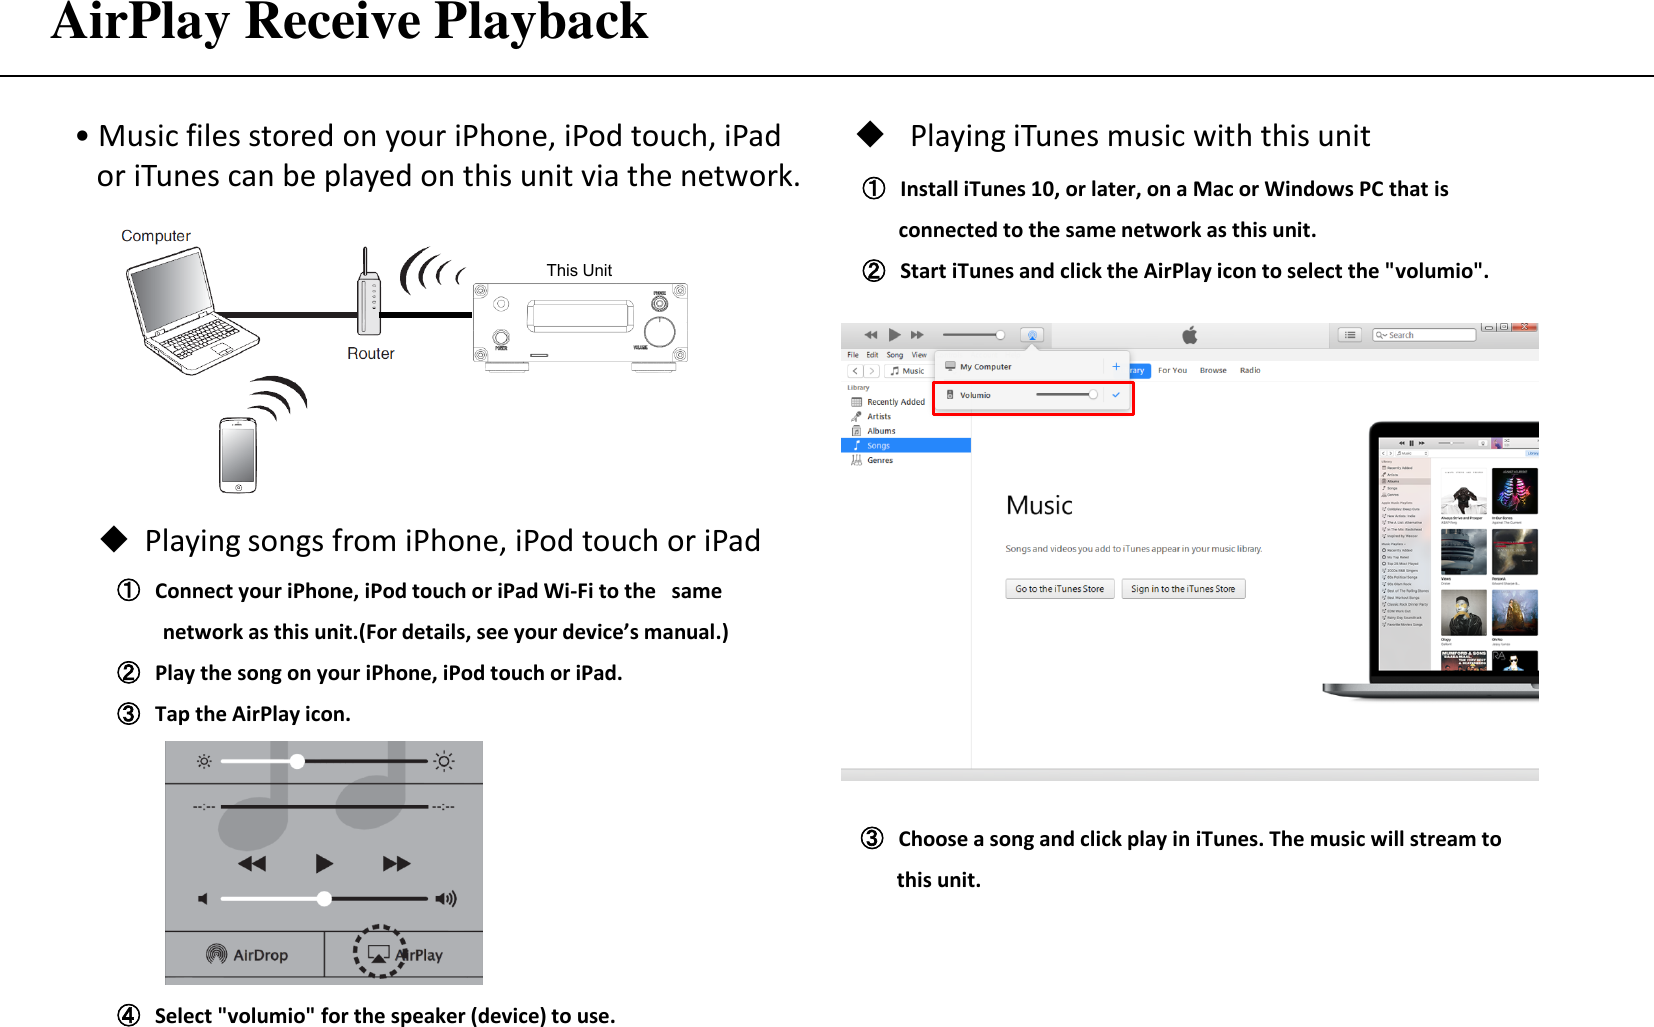 AirPlay Receive Playback ① Connect your iPhone, iPod touch or iPad Wi-Fi to the same     network as this unit.(For details, see your device’s manual.) ② Play the song on your iPhone, iPod touch or iPad. ③ Tap the AirPlay icon. • Music files stored on your iPhone, iPod touch, iPad     or iTunes can be played on this unit via the network. Playing songs from iPhone, iPod touch or iPad ④ Select &quot;volumio&quot; for the speaker (device) to use. ① Install iTunes 10, or later, on a Mac or Windows PC that is          connected to the same network as this unit. ② Start iTunes and click the AirPlay icon to select the &quot;volumio&quot;. Playing iTunes music with this unit ③ Choose a song and click play in iTunes. The music will stream to            this unit. This Unit 